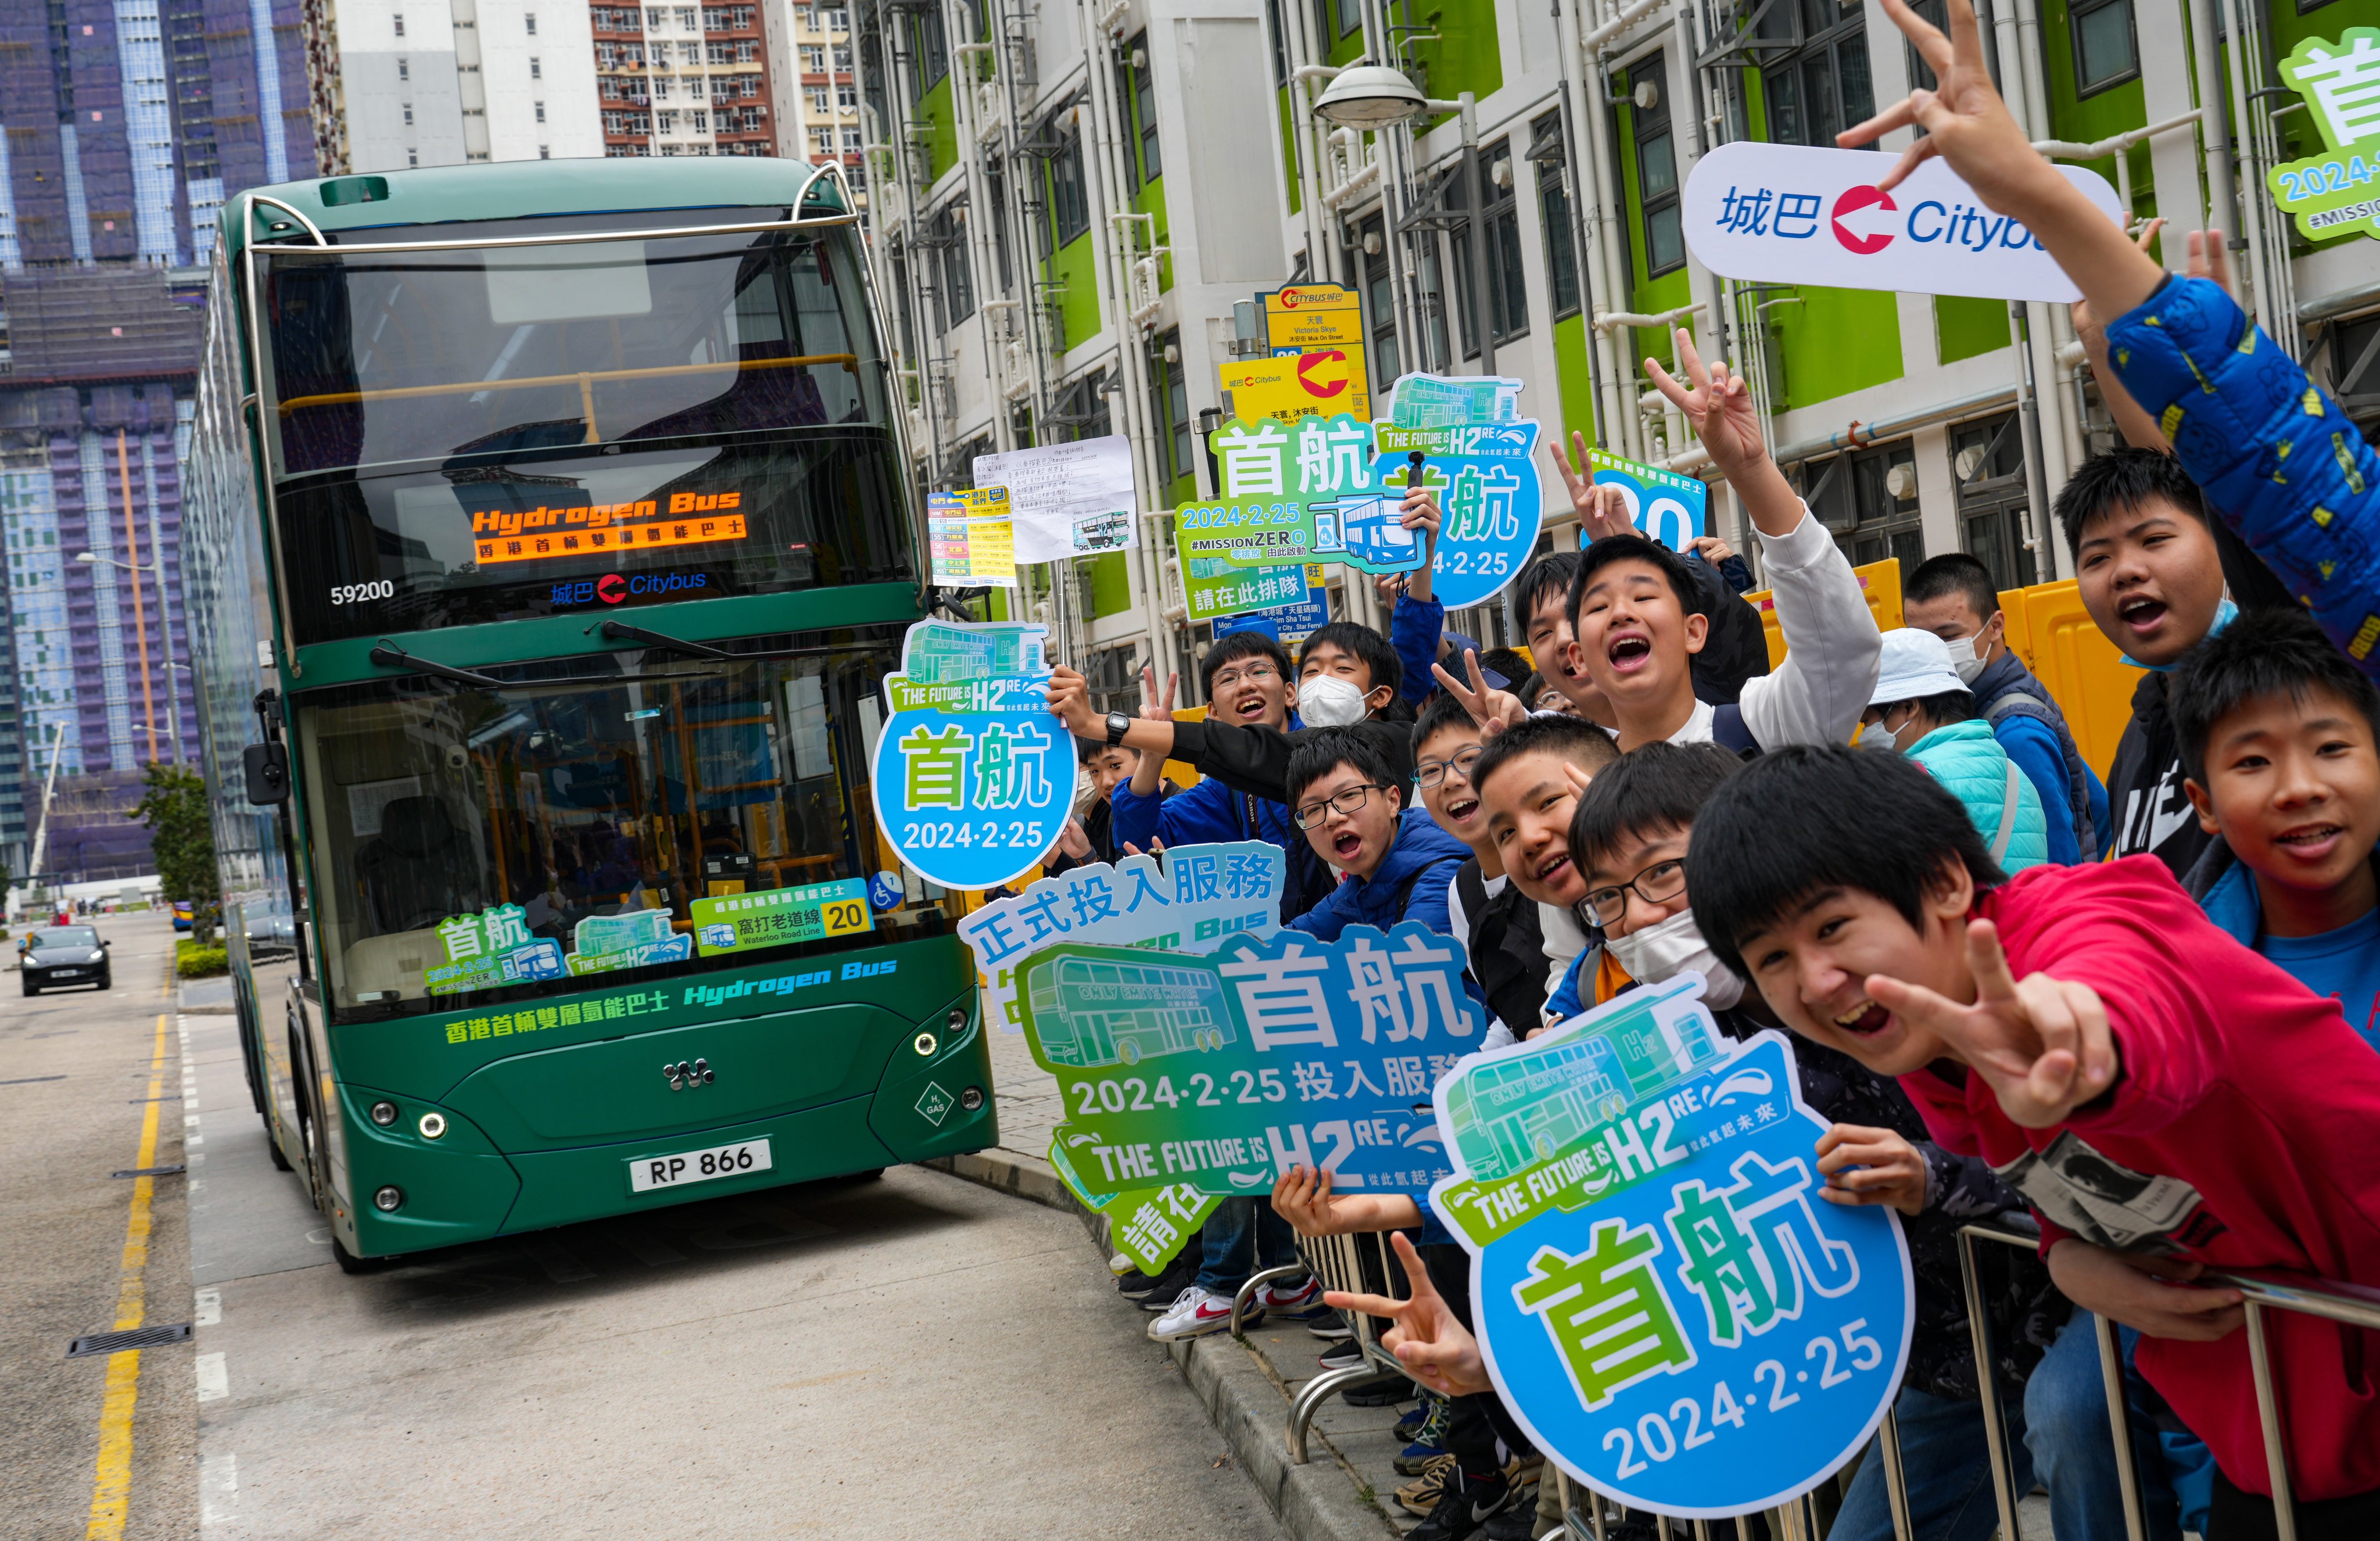 Bus fans cheer in anticipation of the maiden voyage of Hong Kong’s first hydrogen-powered double-decker bus on February 25. Photo: Sam Tsang